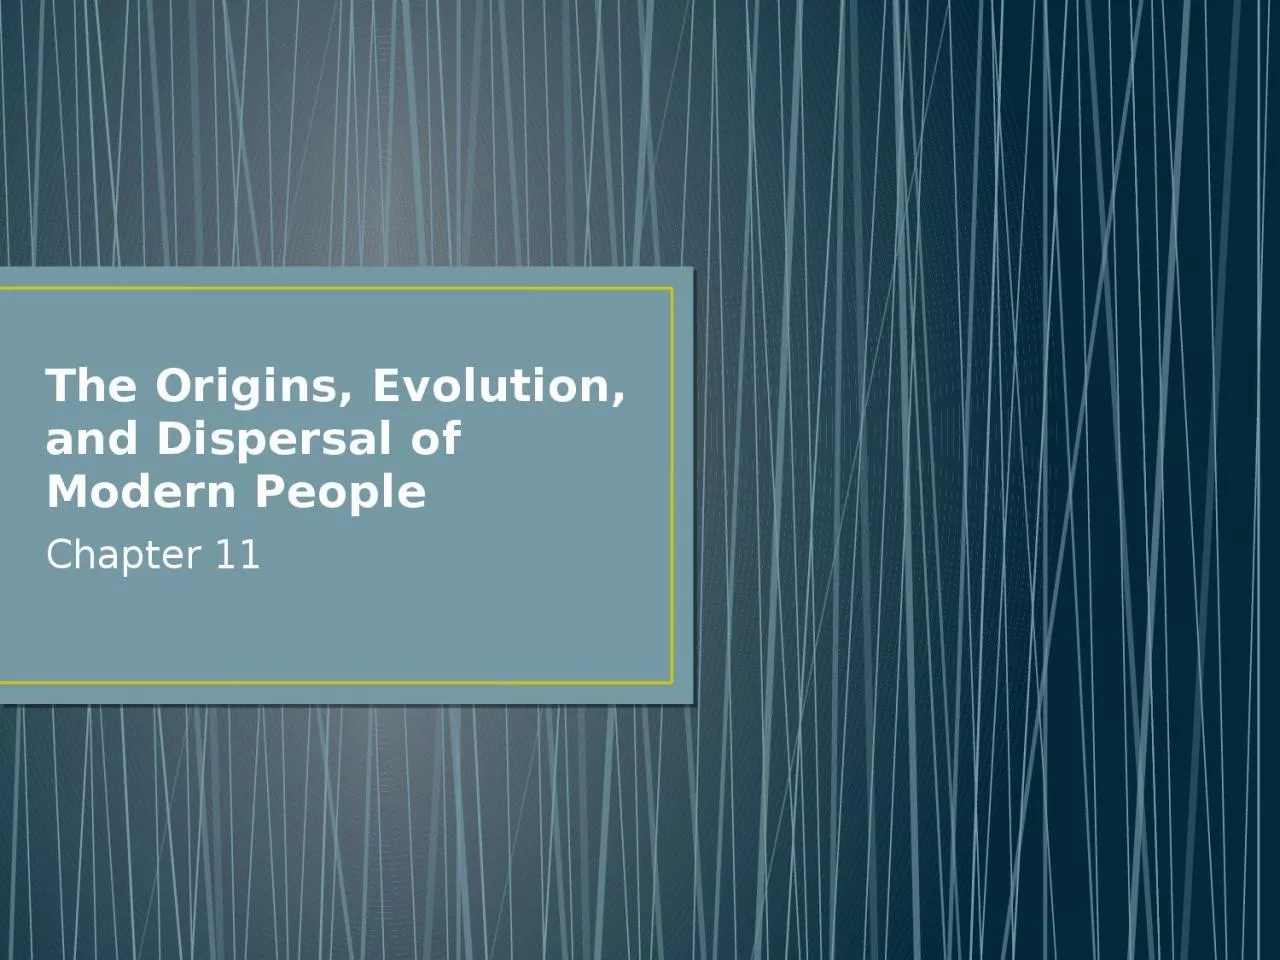 The Origins, Evolution, and Dispersal of Modern People